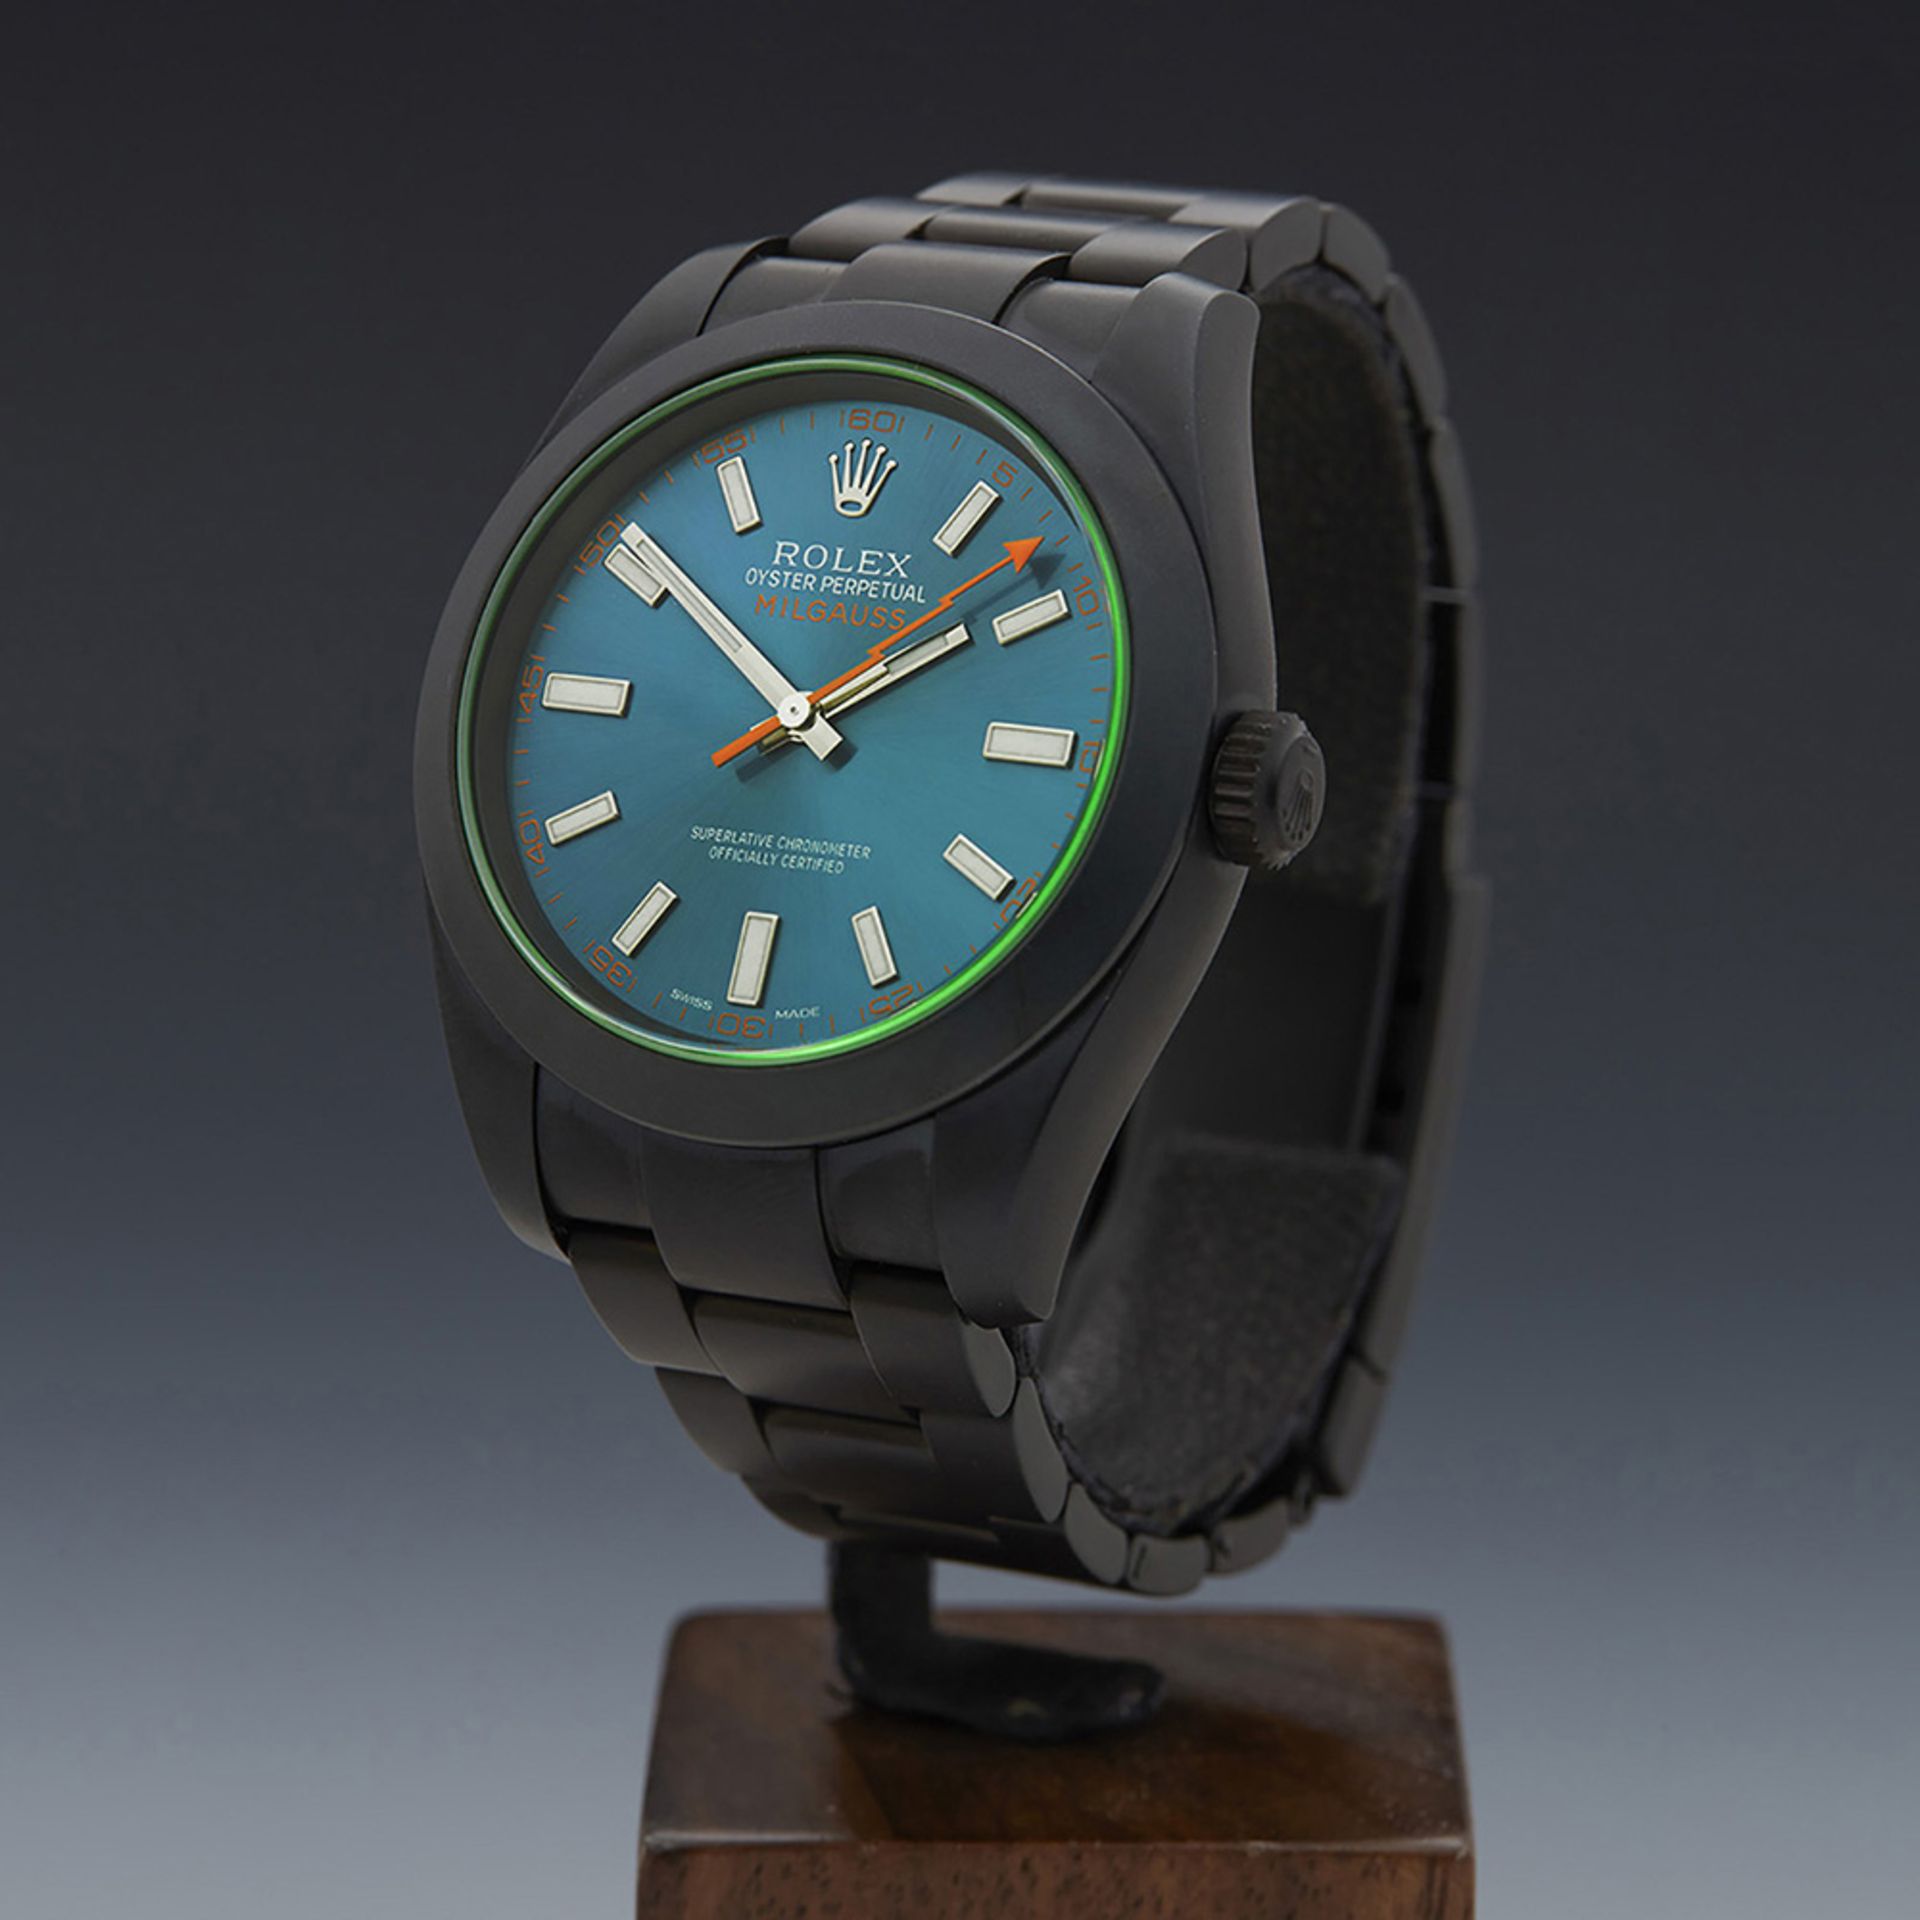 Rolex, Milgauss Green Glass 40mm Black DLC Coated Stainless Steel 116400GV - Image 3 of 8